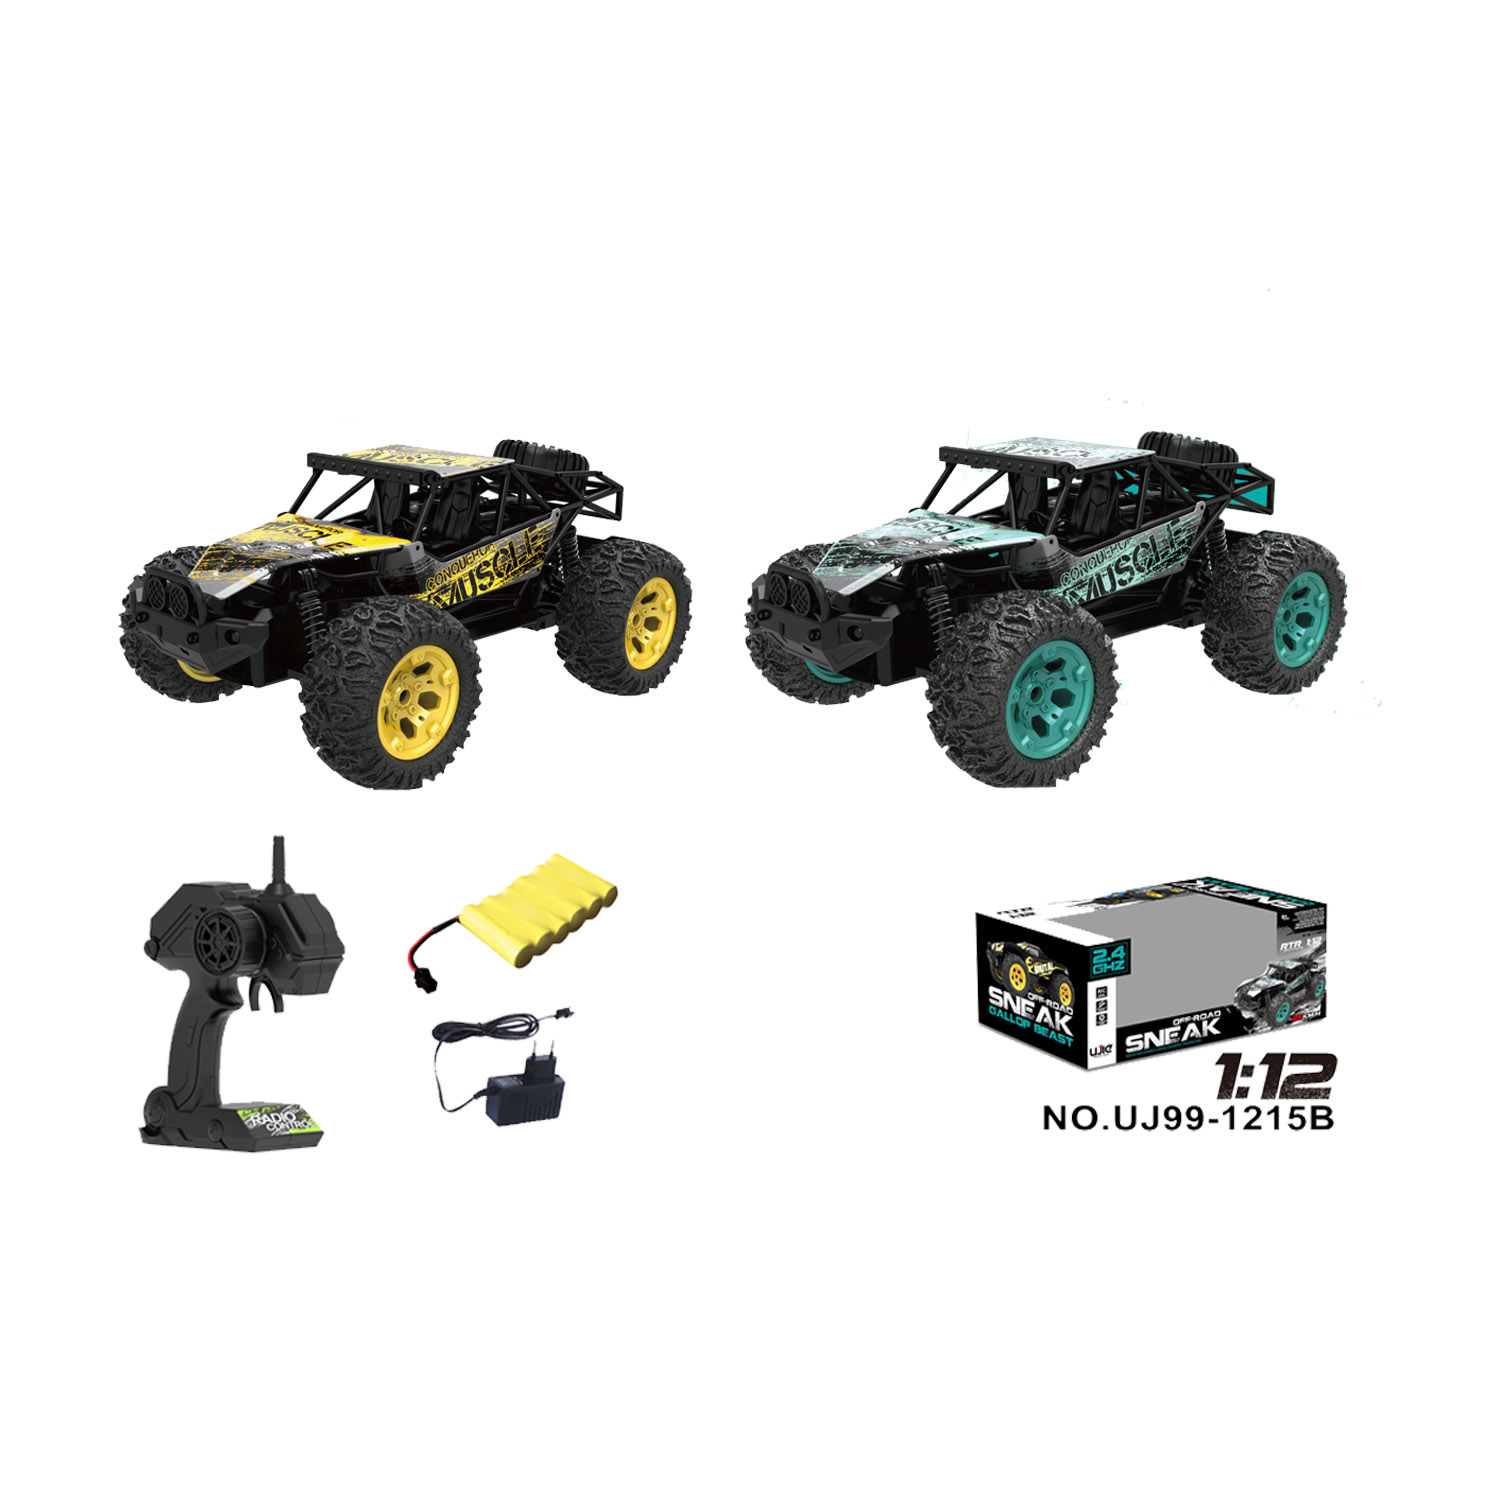 R/C AUTO 1:12 OFF-ROAD 2 ASS RADIOGRAFIS